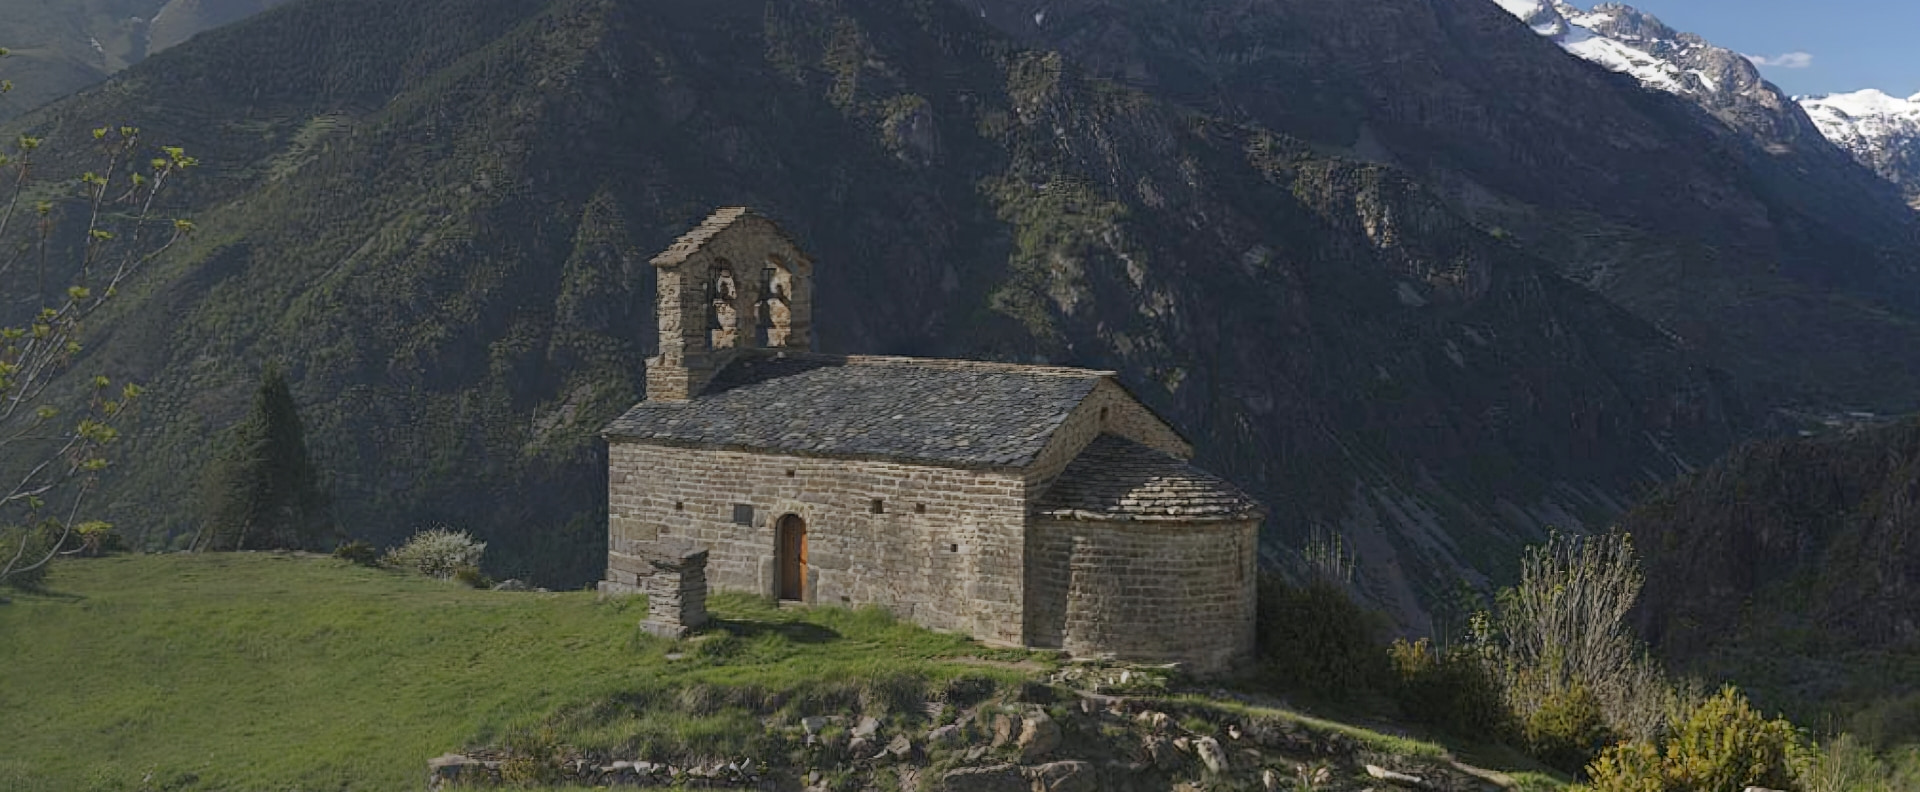 Romanesque church in the vall de boí located at the top of a mountain